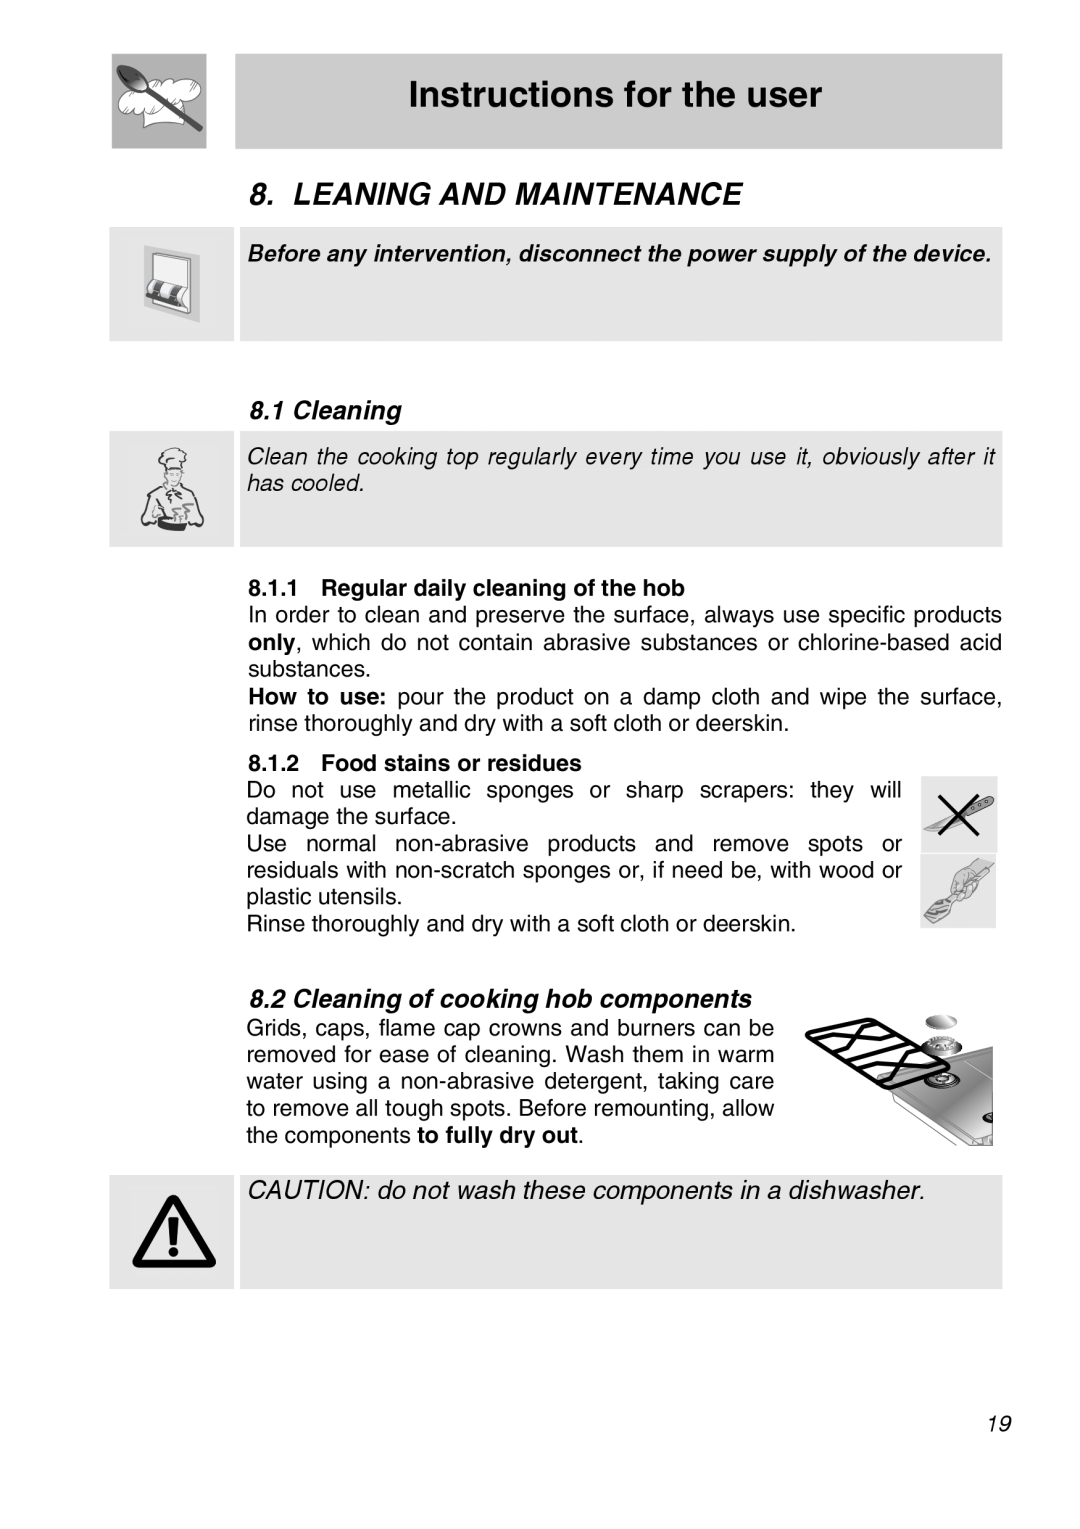 Smeg CIR597X5 manual Leaning And Maintenance, Instructions for the user, Cleaning of cooking hob components 